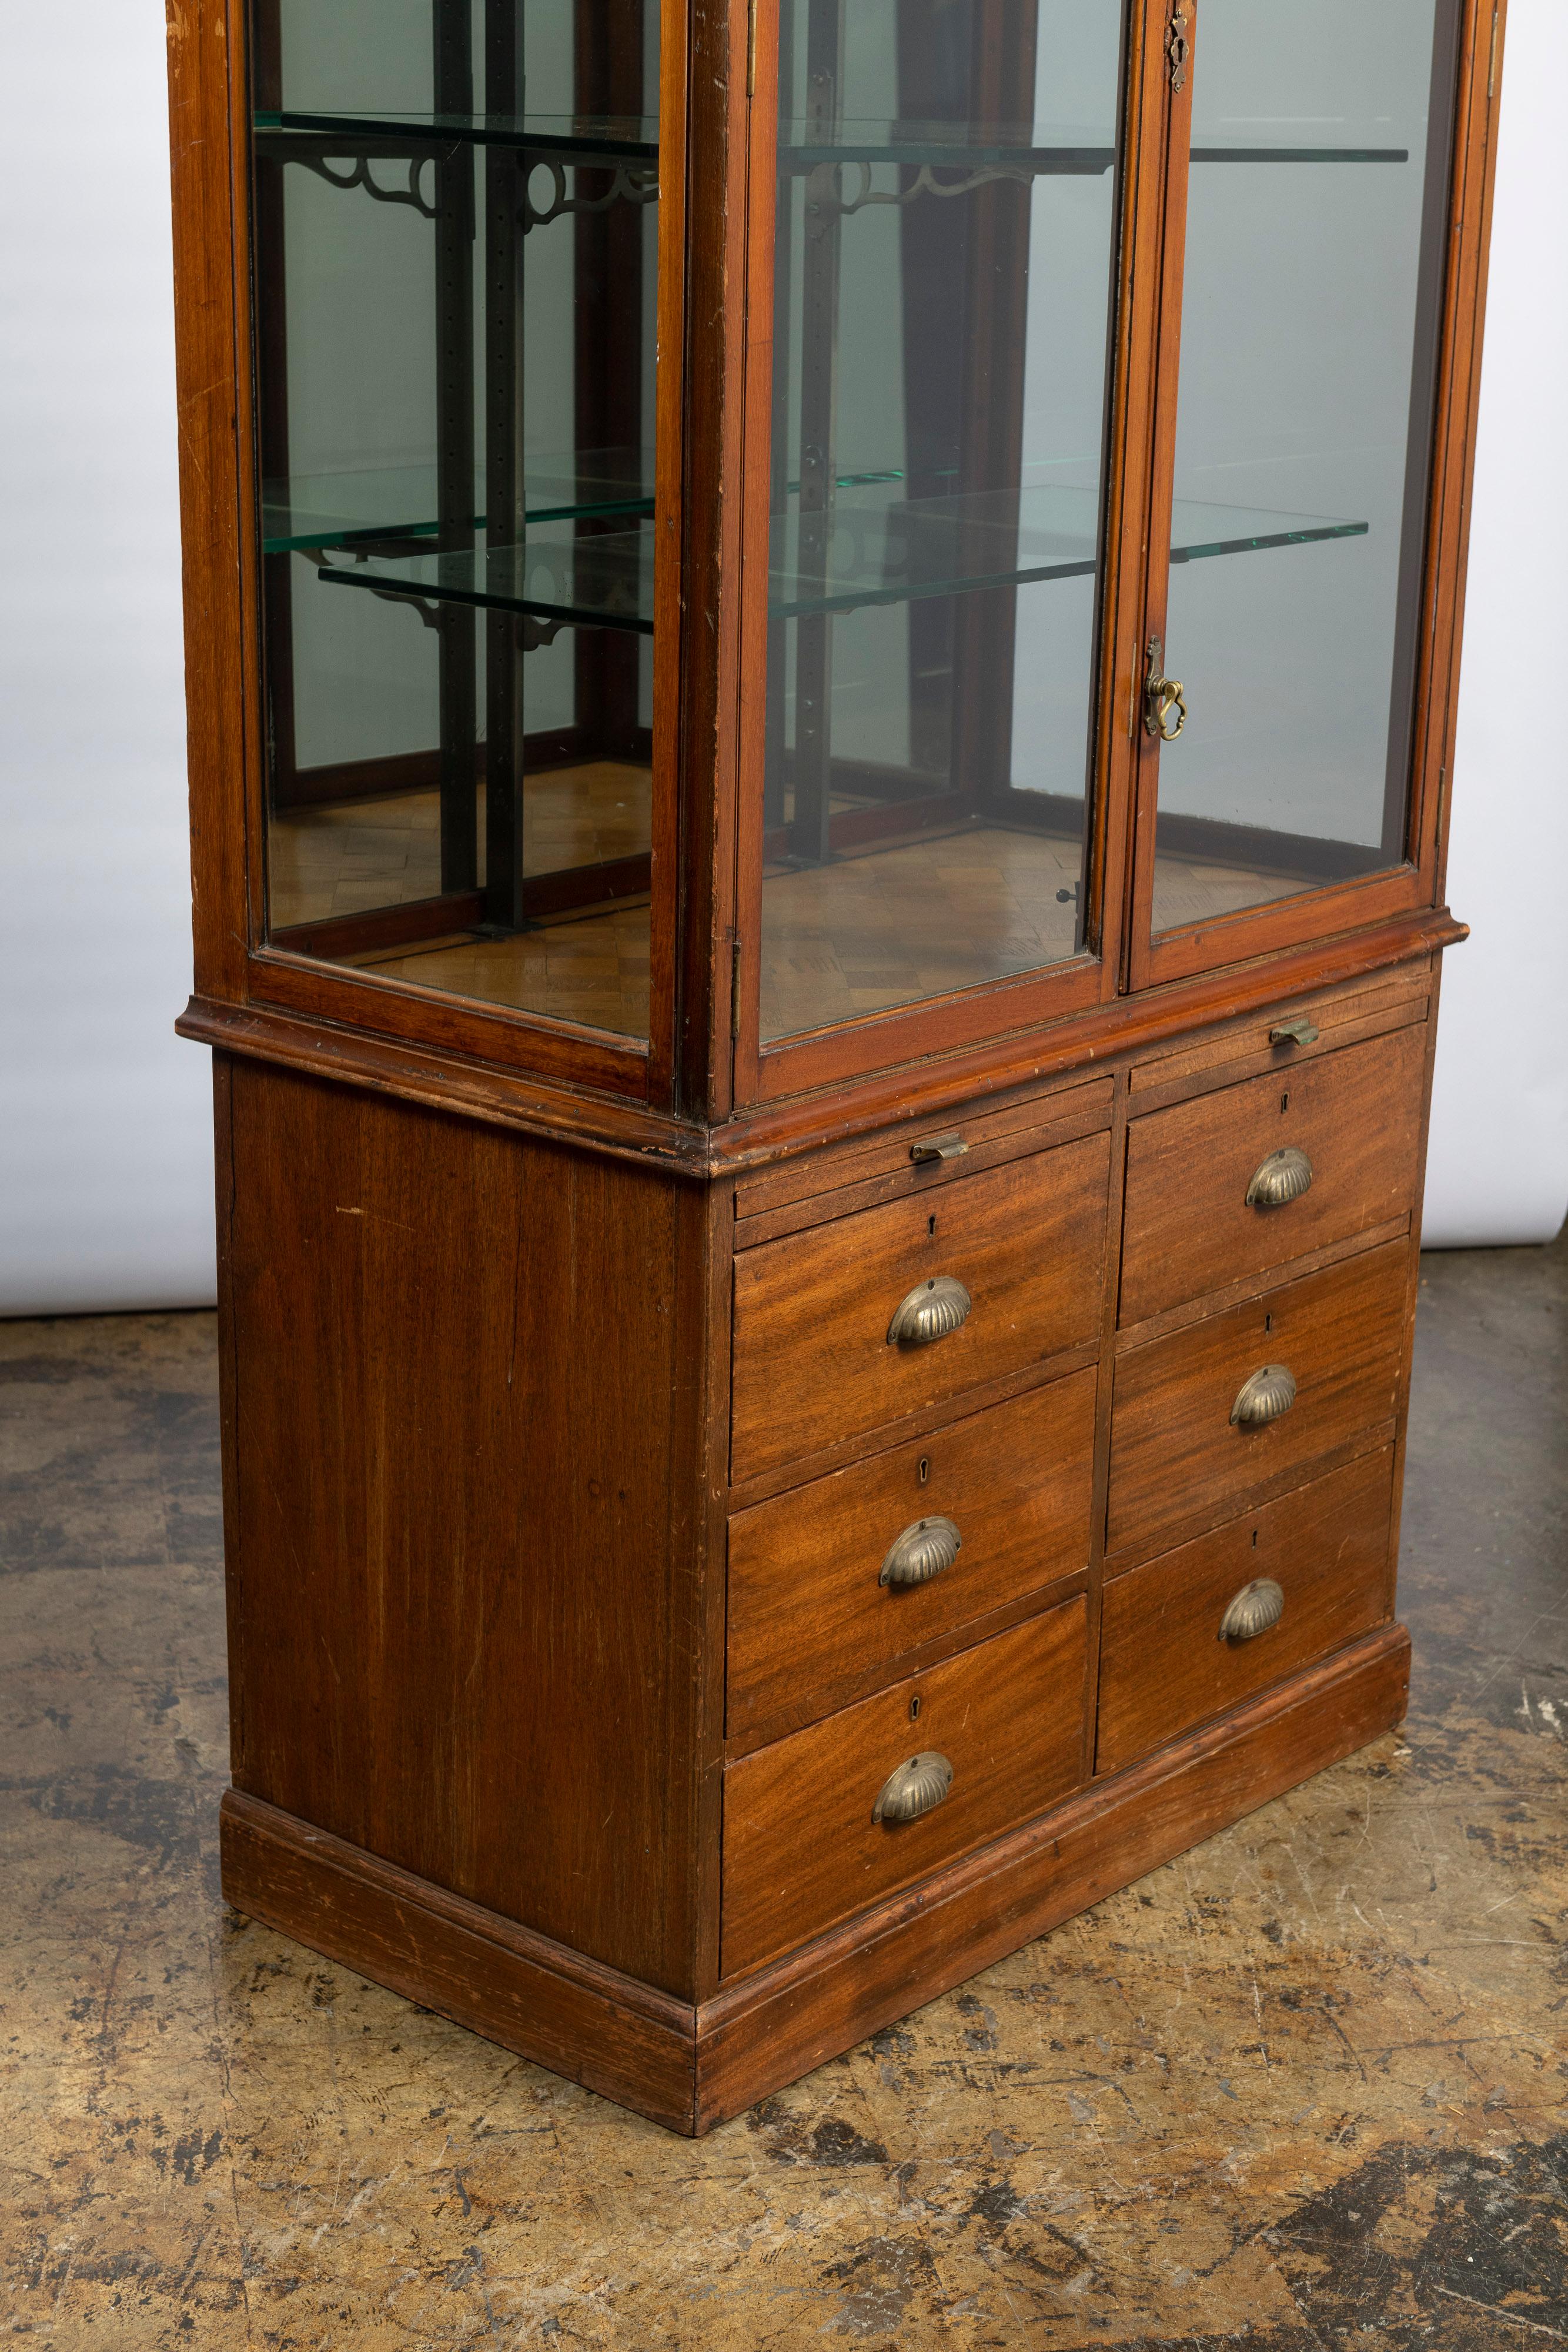 Antique English Haberdashery or Apothecary Cabinet, with Wood and Glass For Sale 1